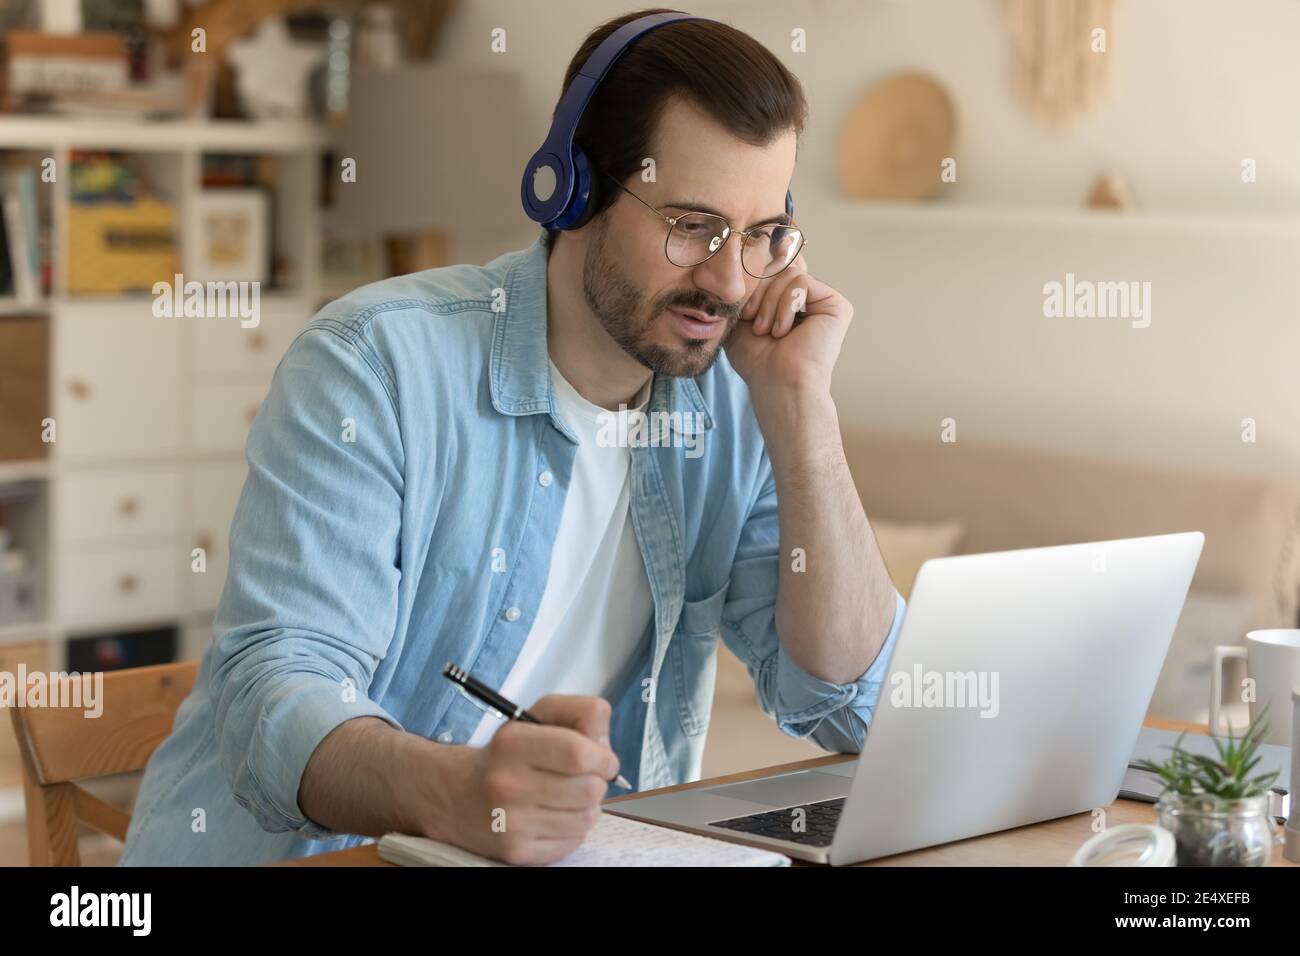 Young man getting remote education sitting by laptop in headphones Stock Photo